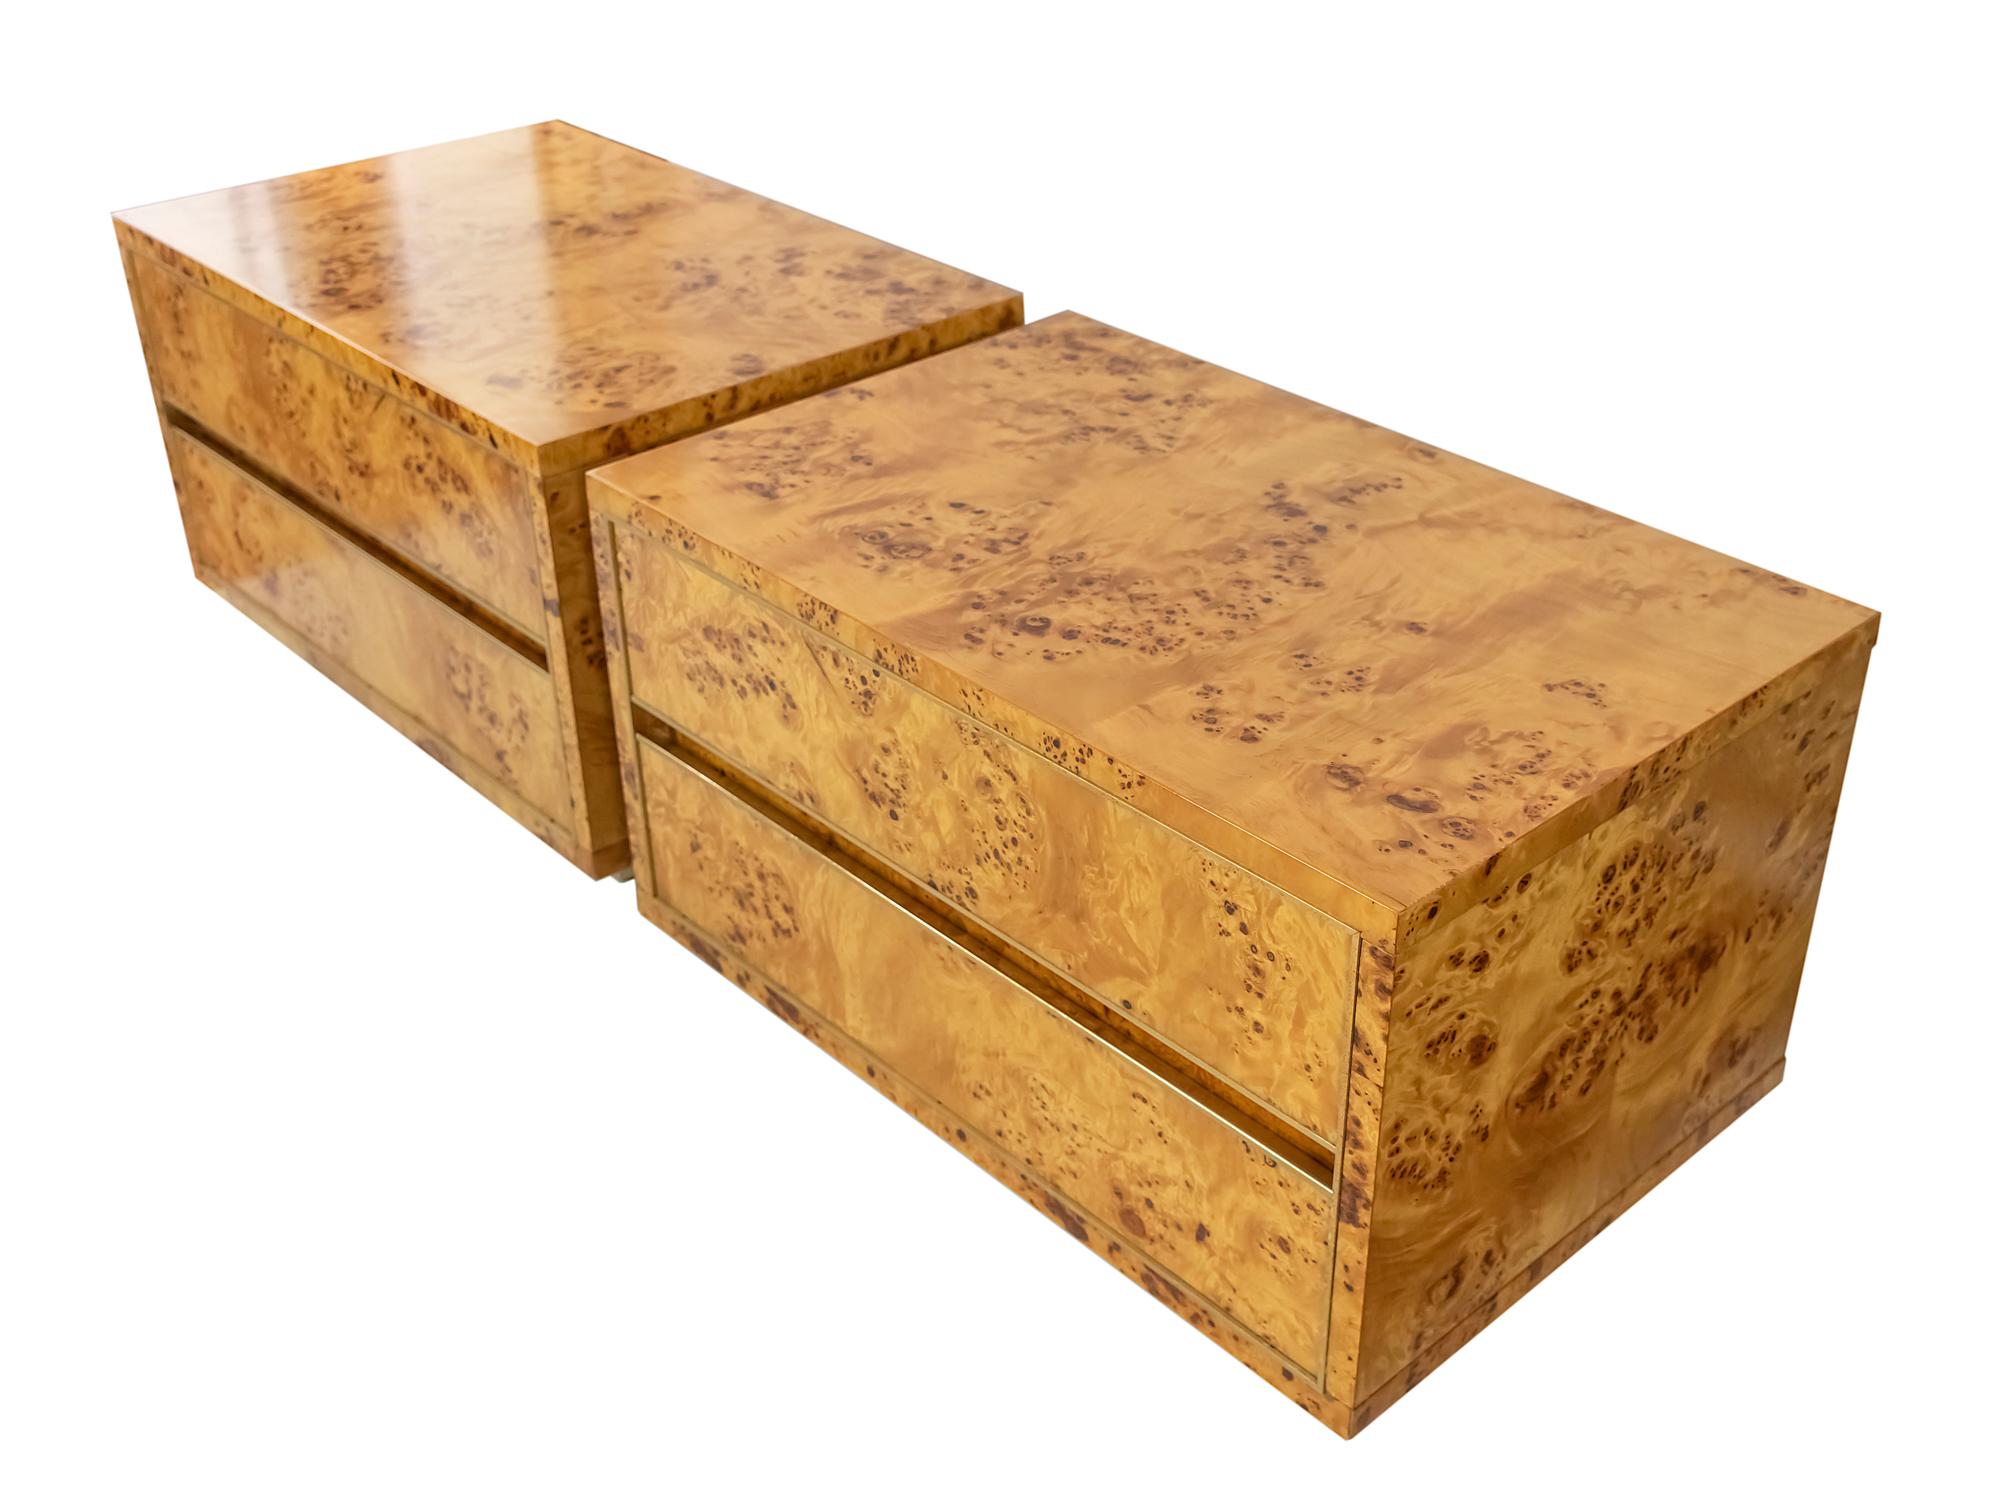 Pair of Italian vintage burl wood verneer bedside chests of drawers, tables, commodes by Willy Rizzo from 1970s.
Each includes two drawers with brass details as handles.
The face part of drawers framed with brass stripes as well pedestal plinth is